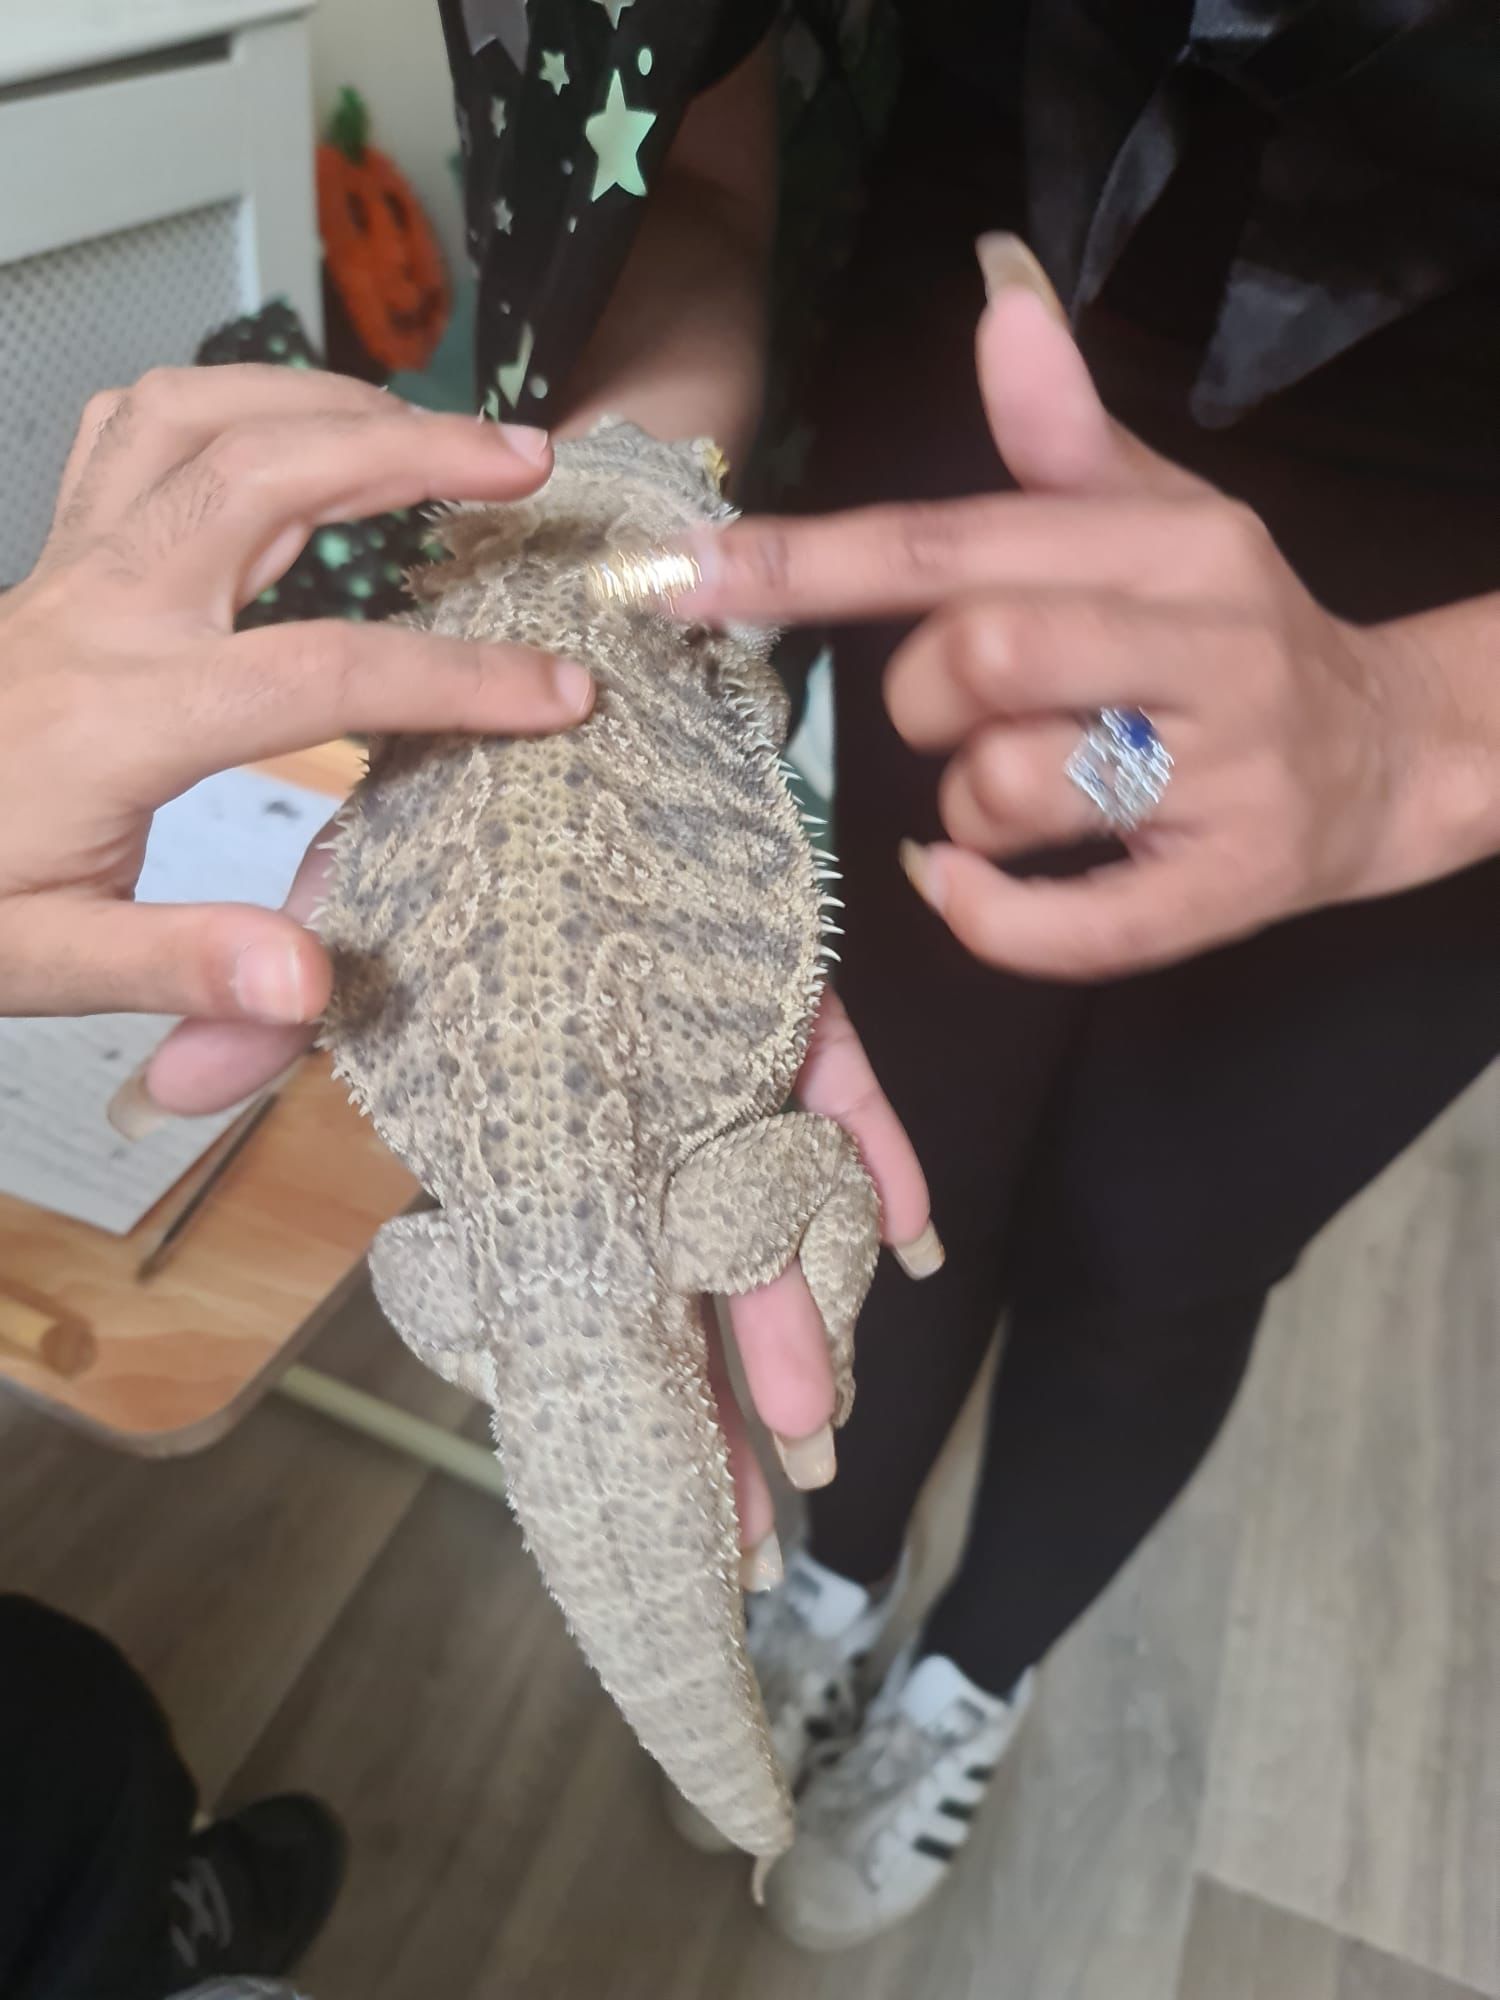 A reptile crawling over the back of someone's hand